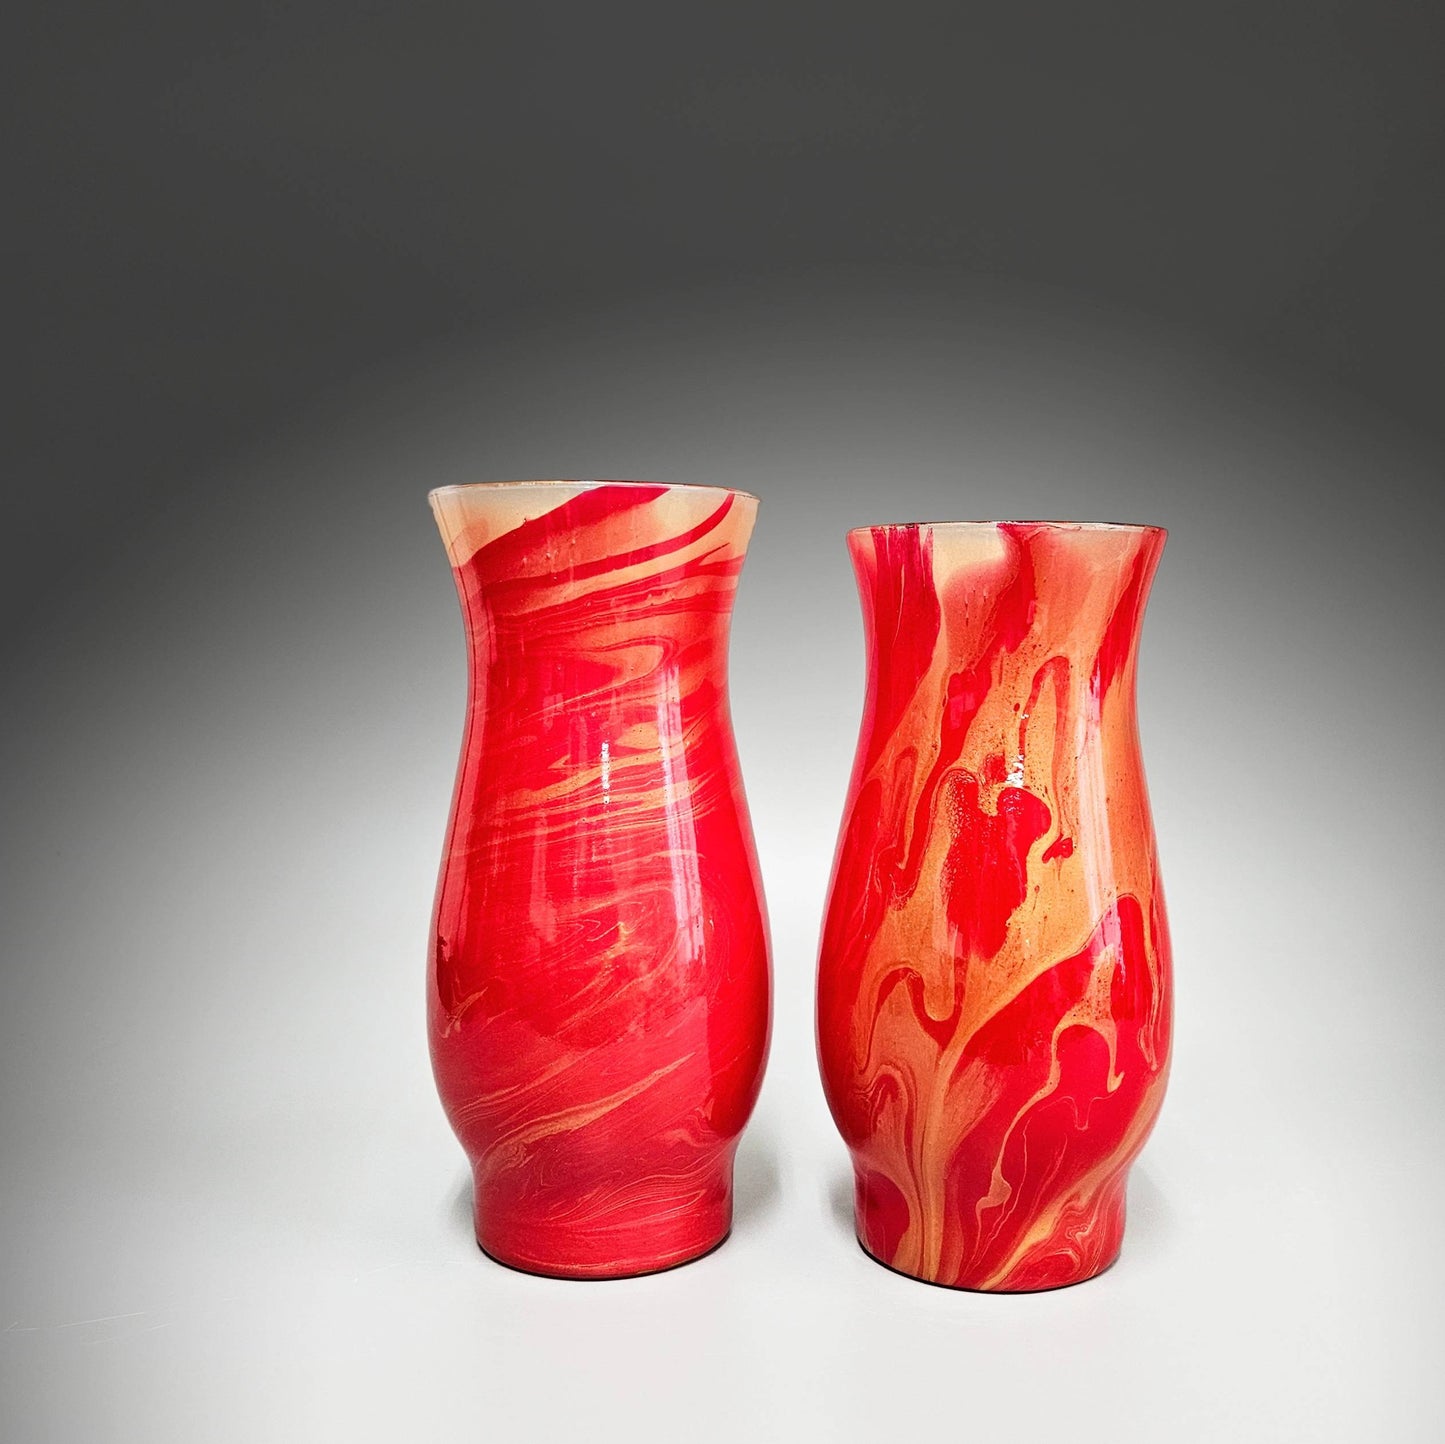 Painted Glass Vase in Red and Metallic Gold